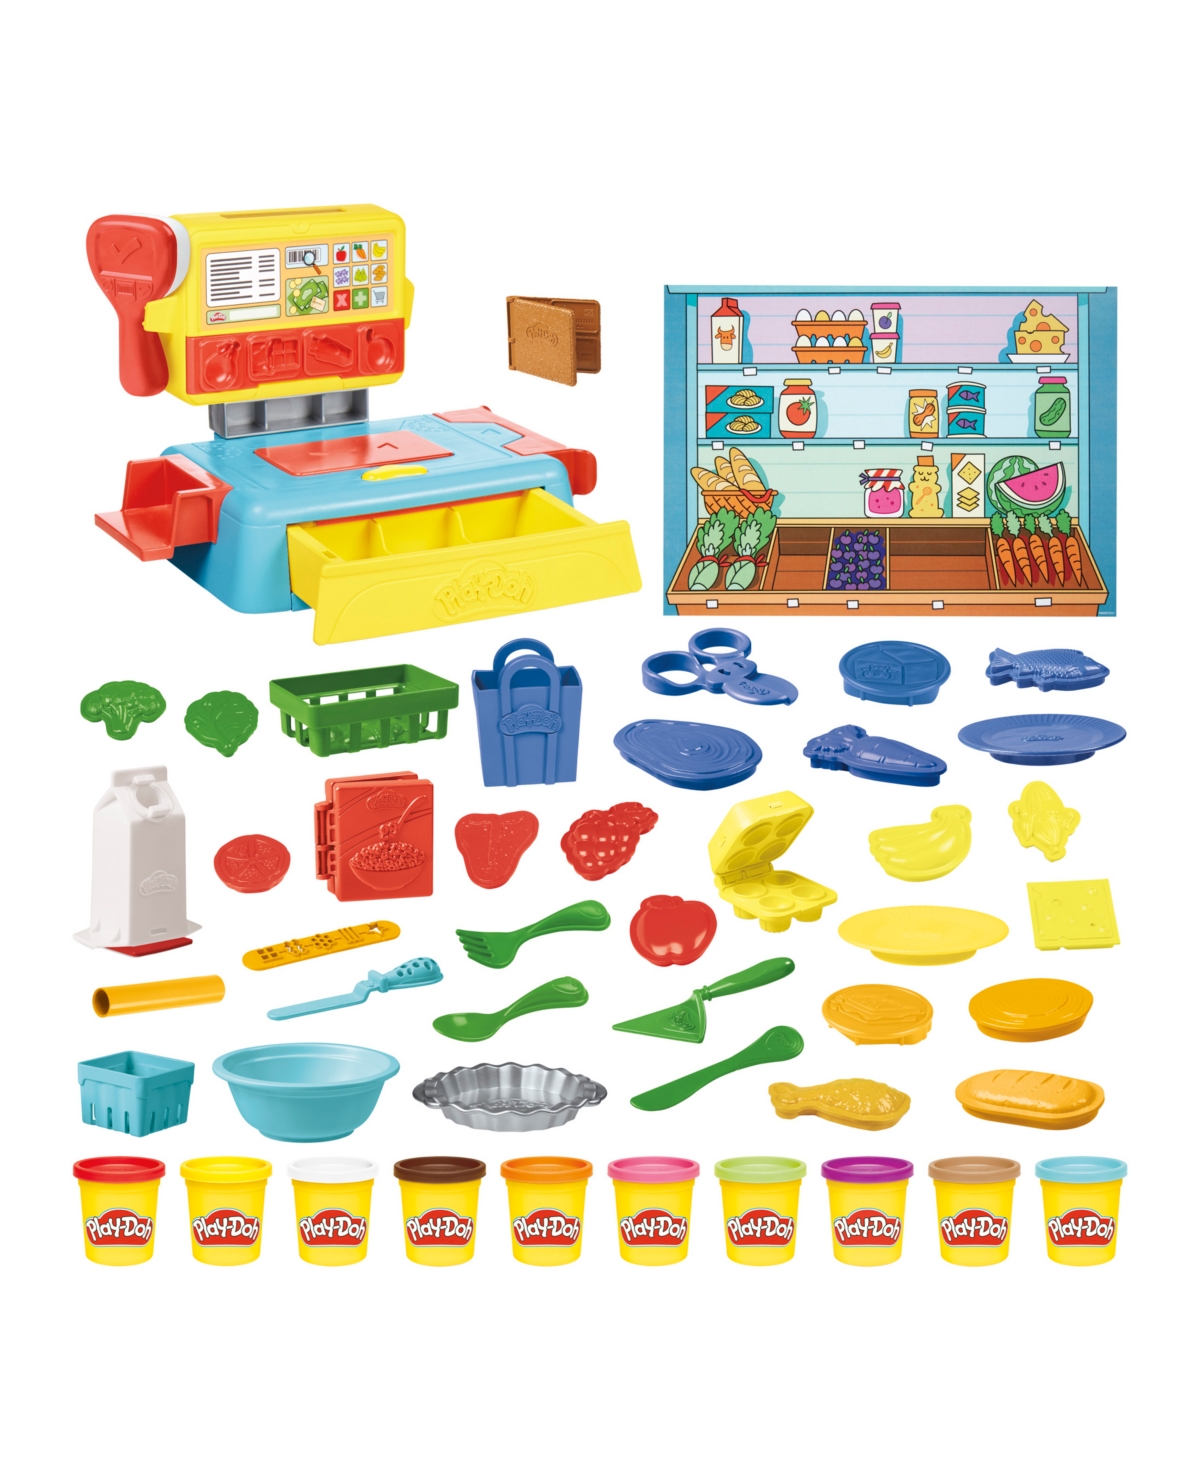 Play-doh Kids' Supermarket Spree Playset In No Color